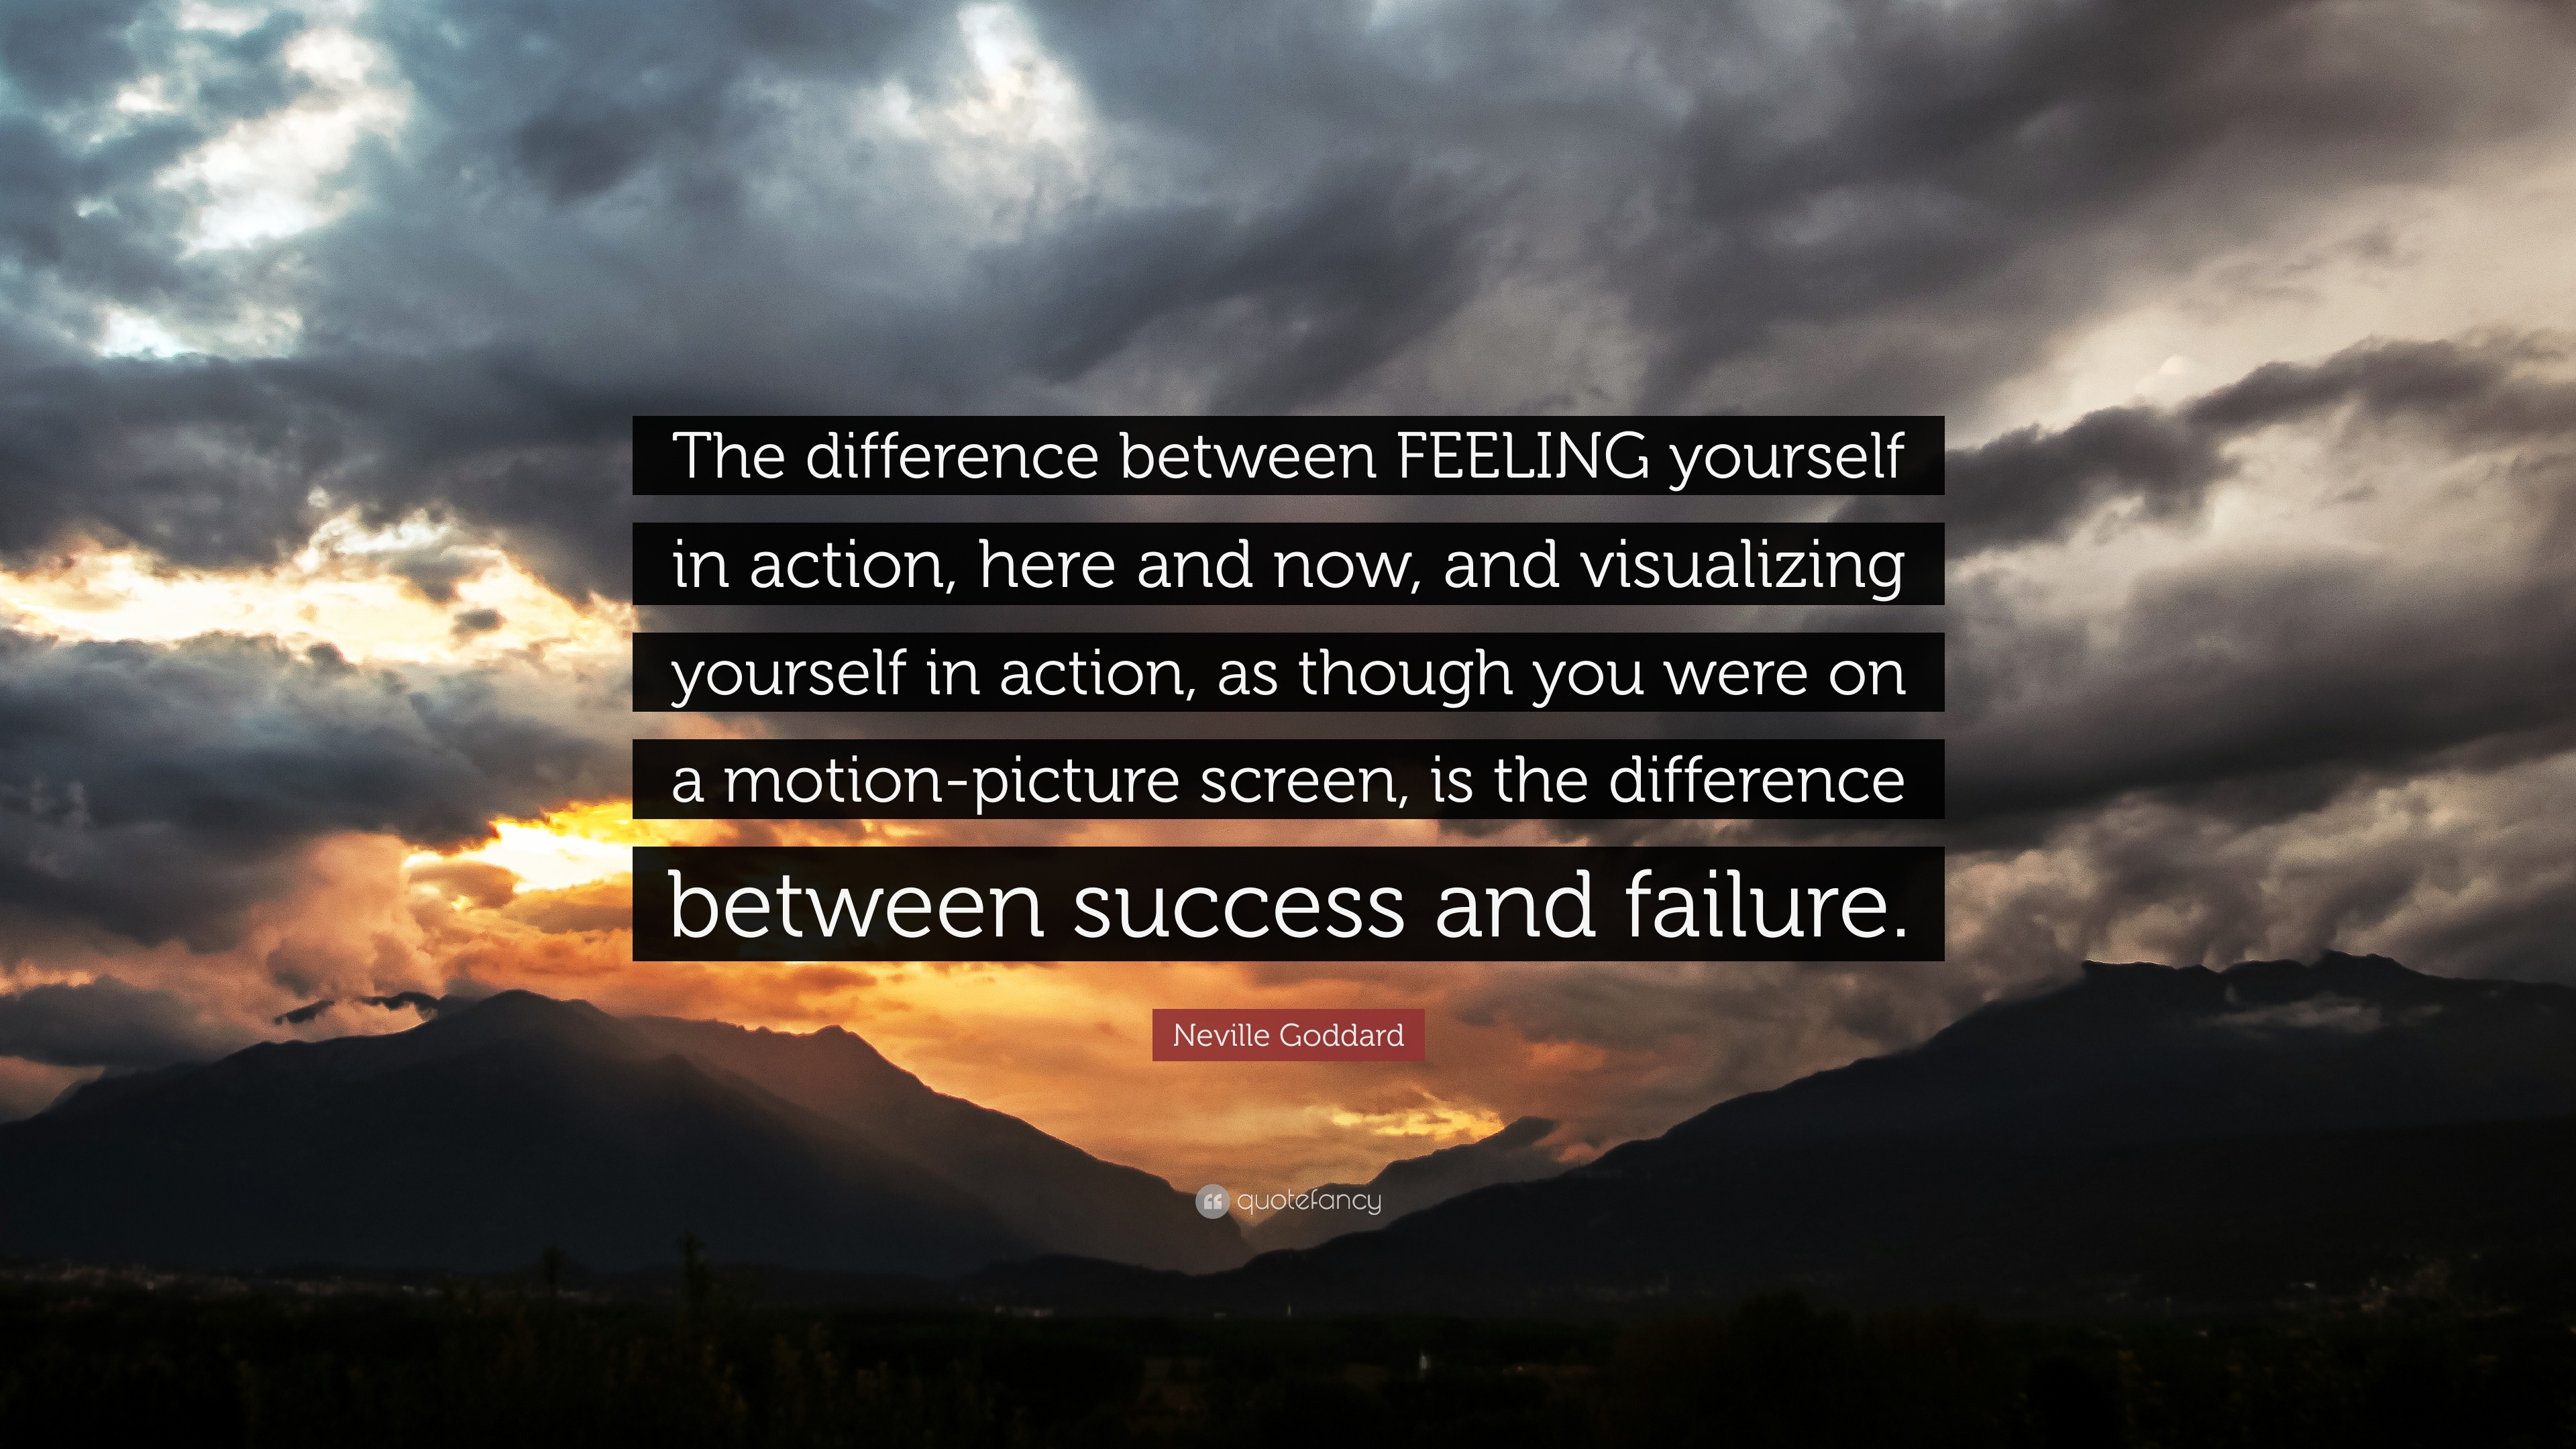 Neville Goddard Quote: “The difference between FEELING yourself in action,  here and now, and visualizing yourself in action, as though you were ...”